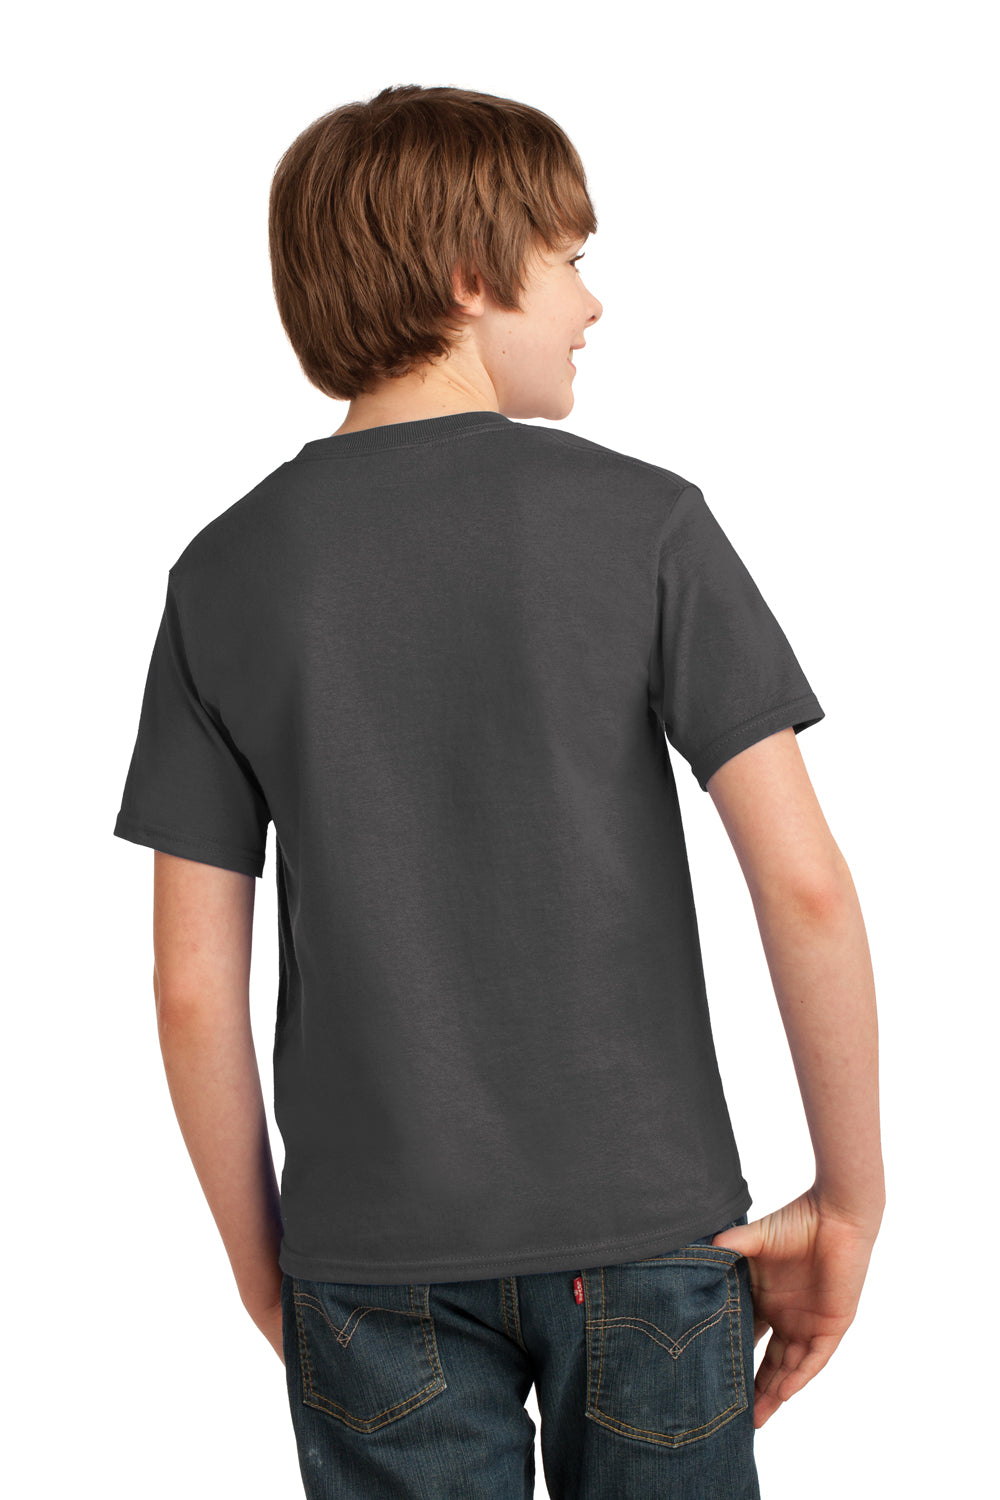 Port & Company PC61Y Youth Essential Short Sleeve Crewneck T-Shirt Charcoal Grey Back